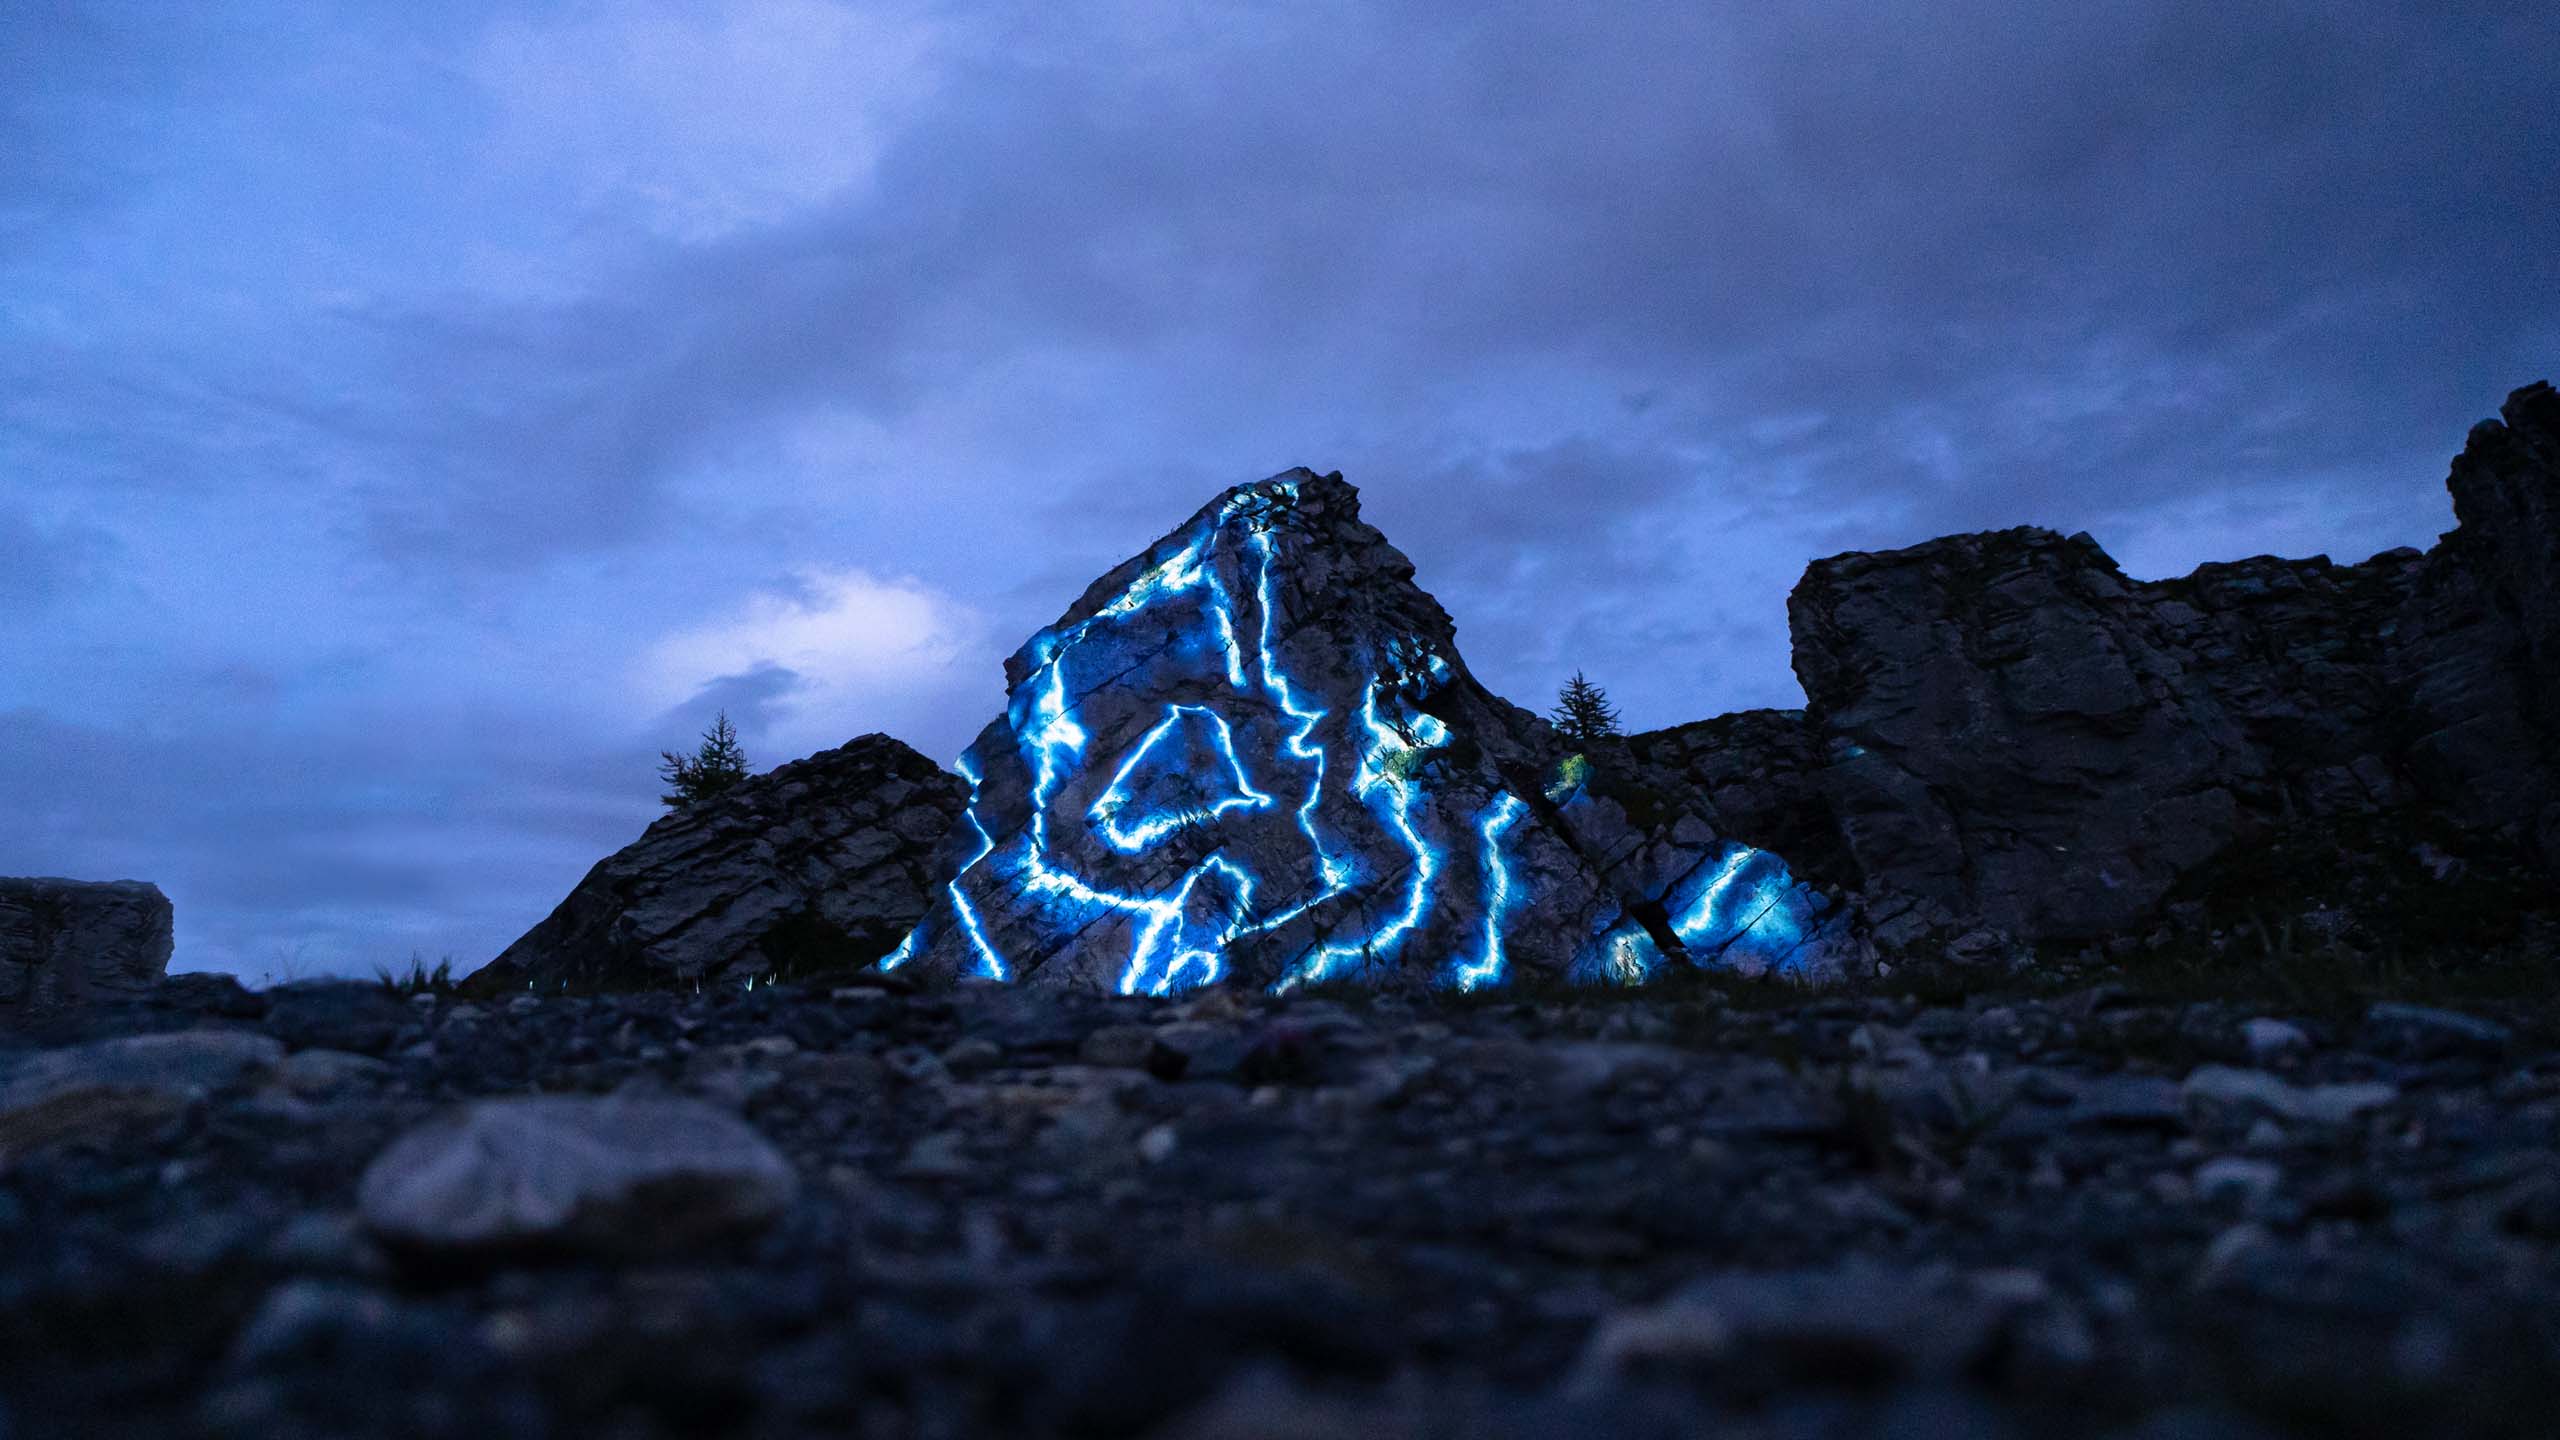 Projection Mapping on a Mountain